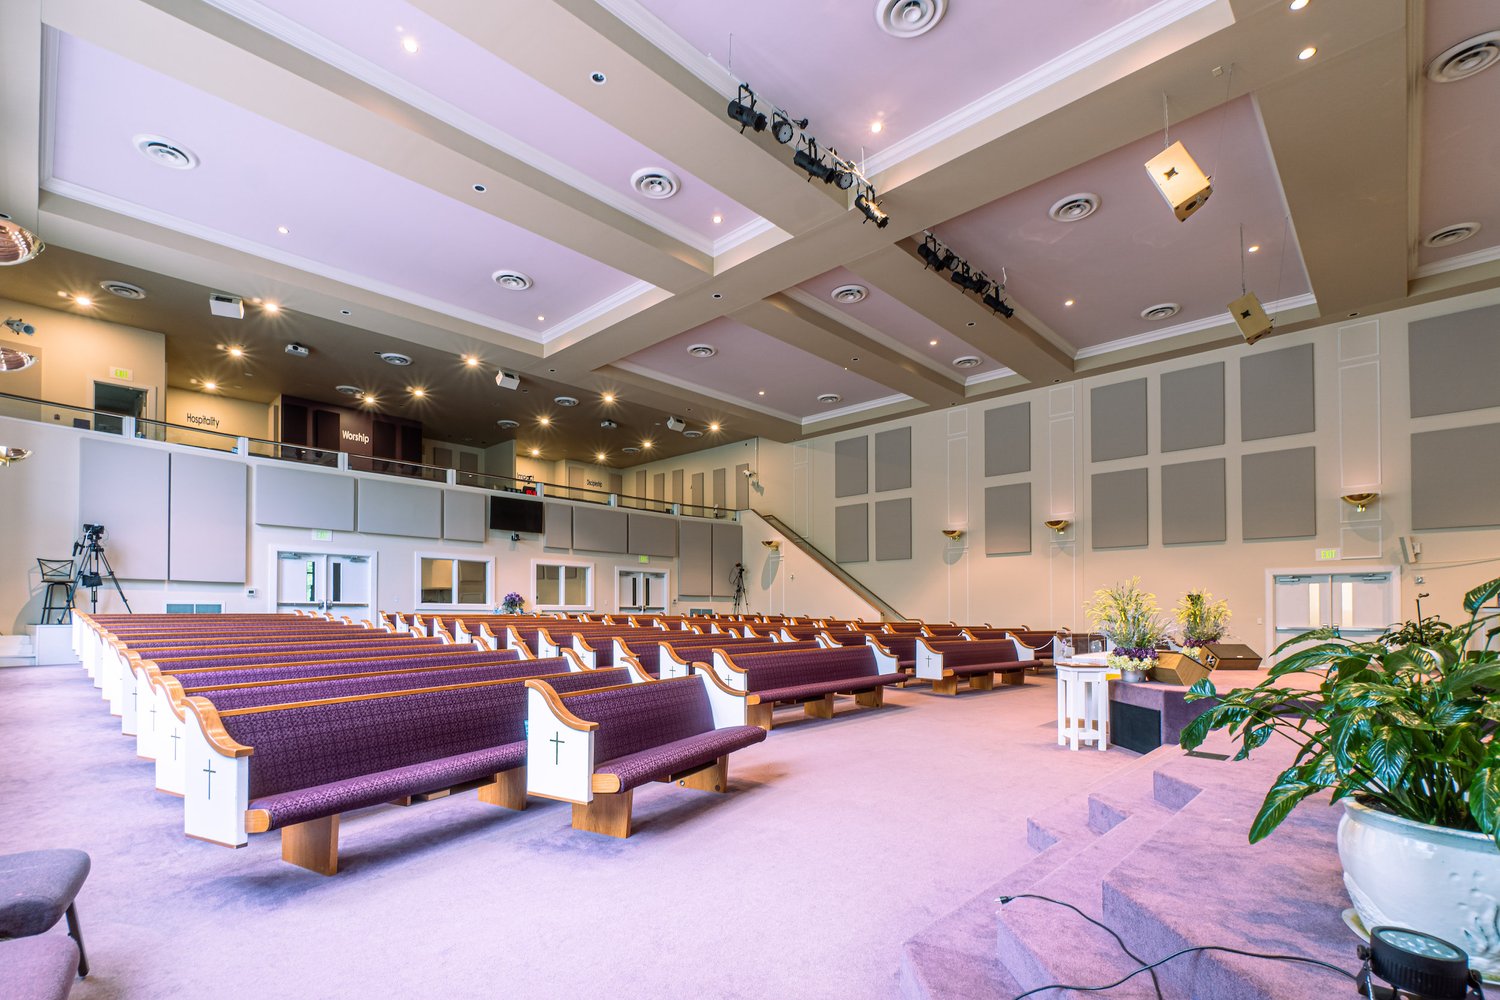 Acoustic treatment for church